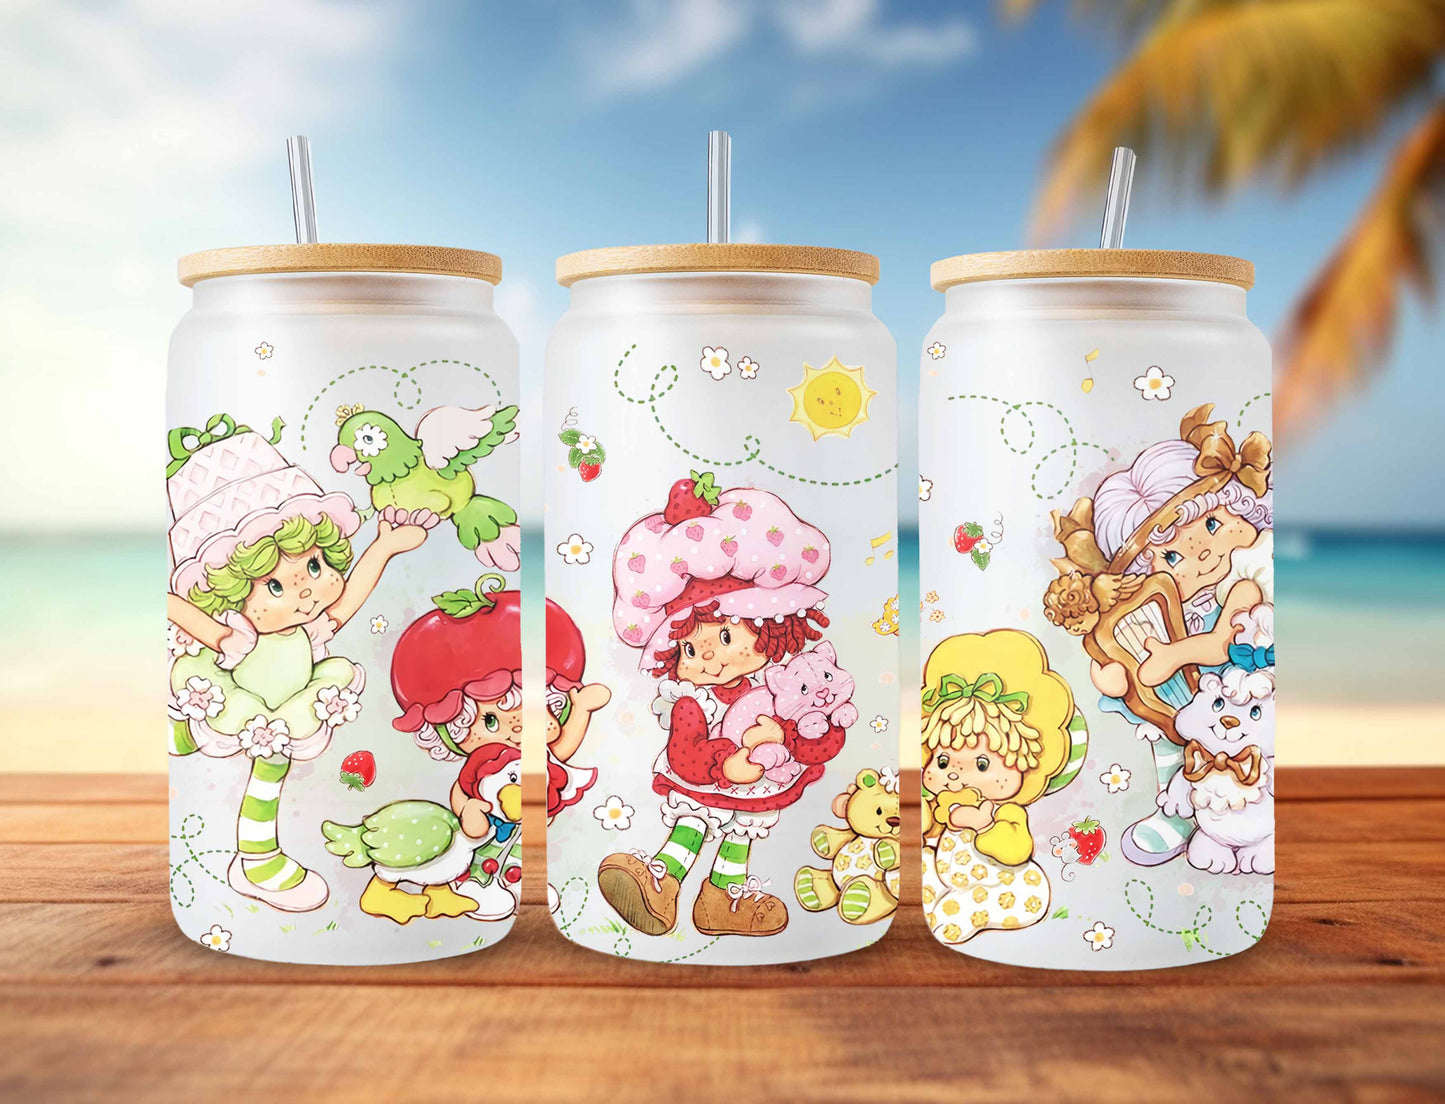 Strawberry Glass Can Png, Cartoon 80s Can Glass, 80s cartoons png, rainbow girl Libbey Glass Can 16oz, Retro 80s cartoons Tumbler Wrap